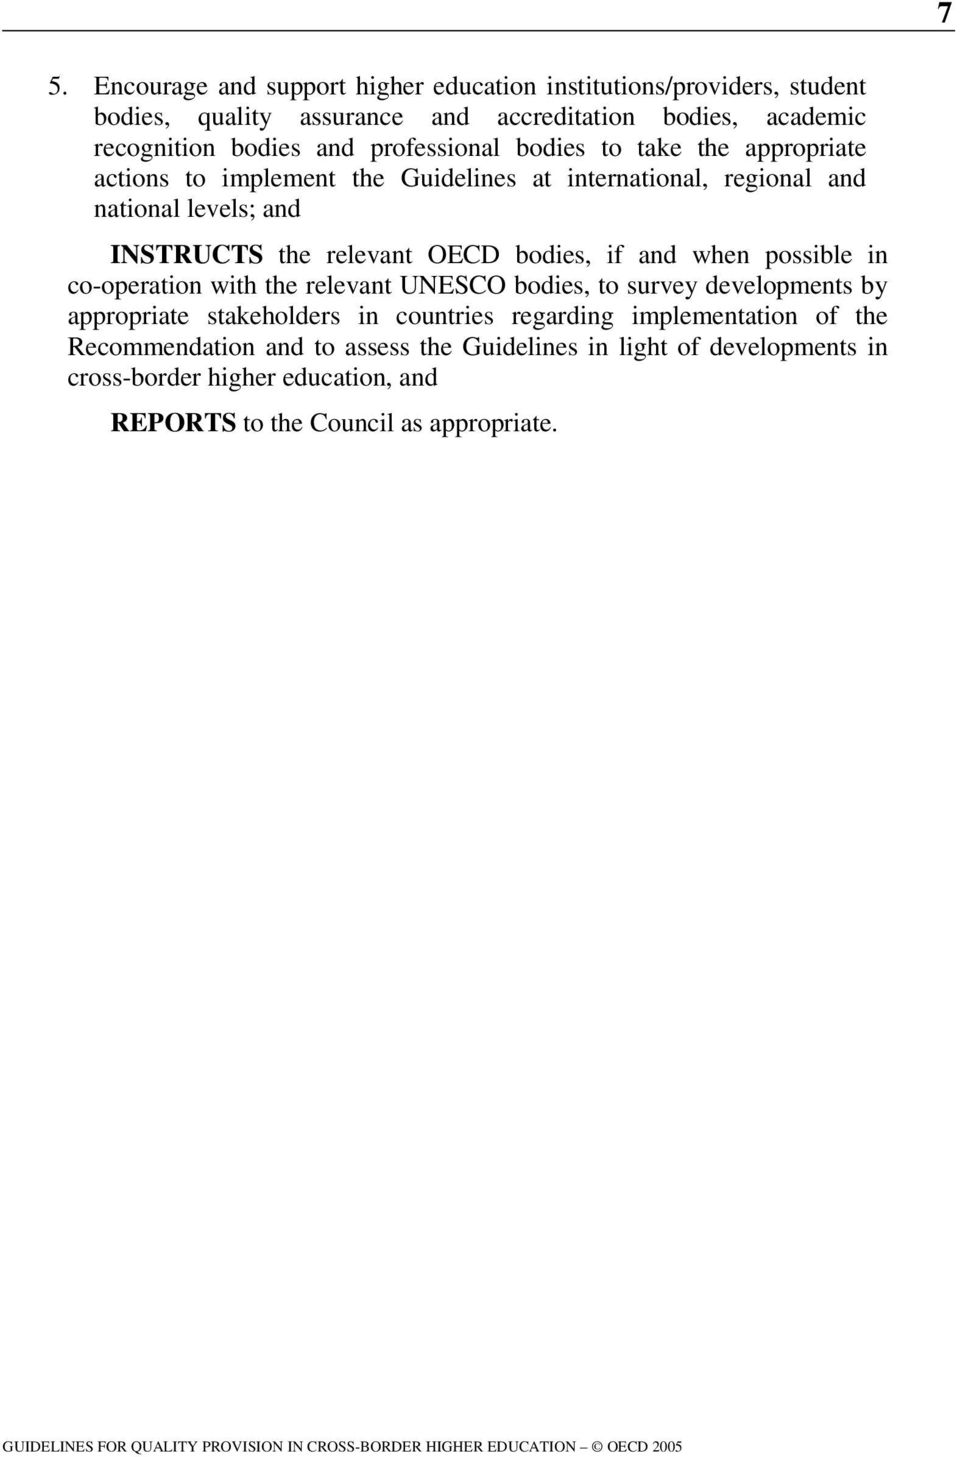 co-operation with the relevant UNESCO bodies, to survey developments by appropriate stakeholders in countries regarding implementation of the Recommendation and to assess the